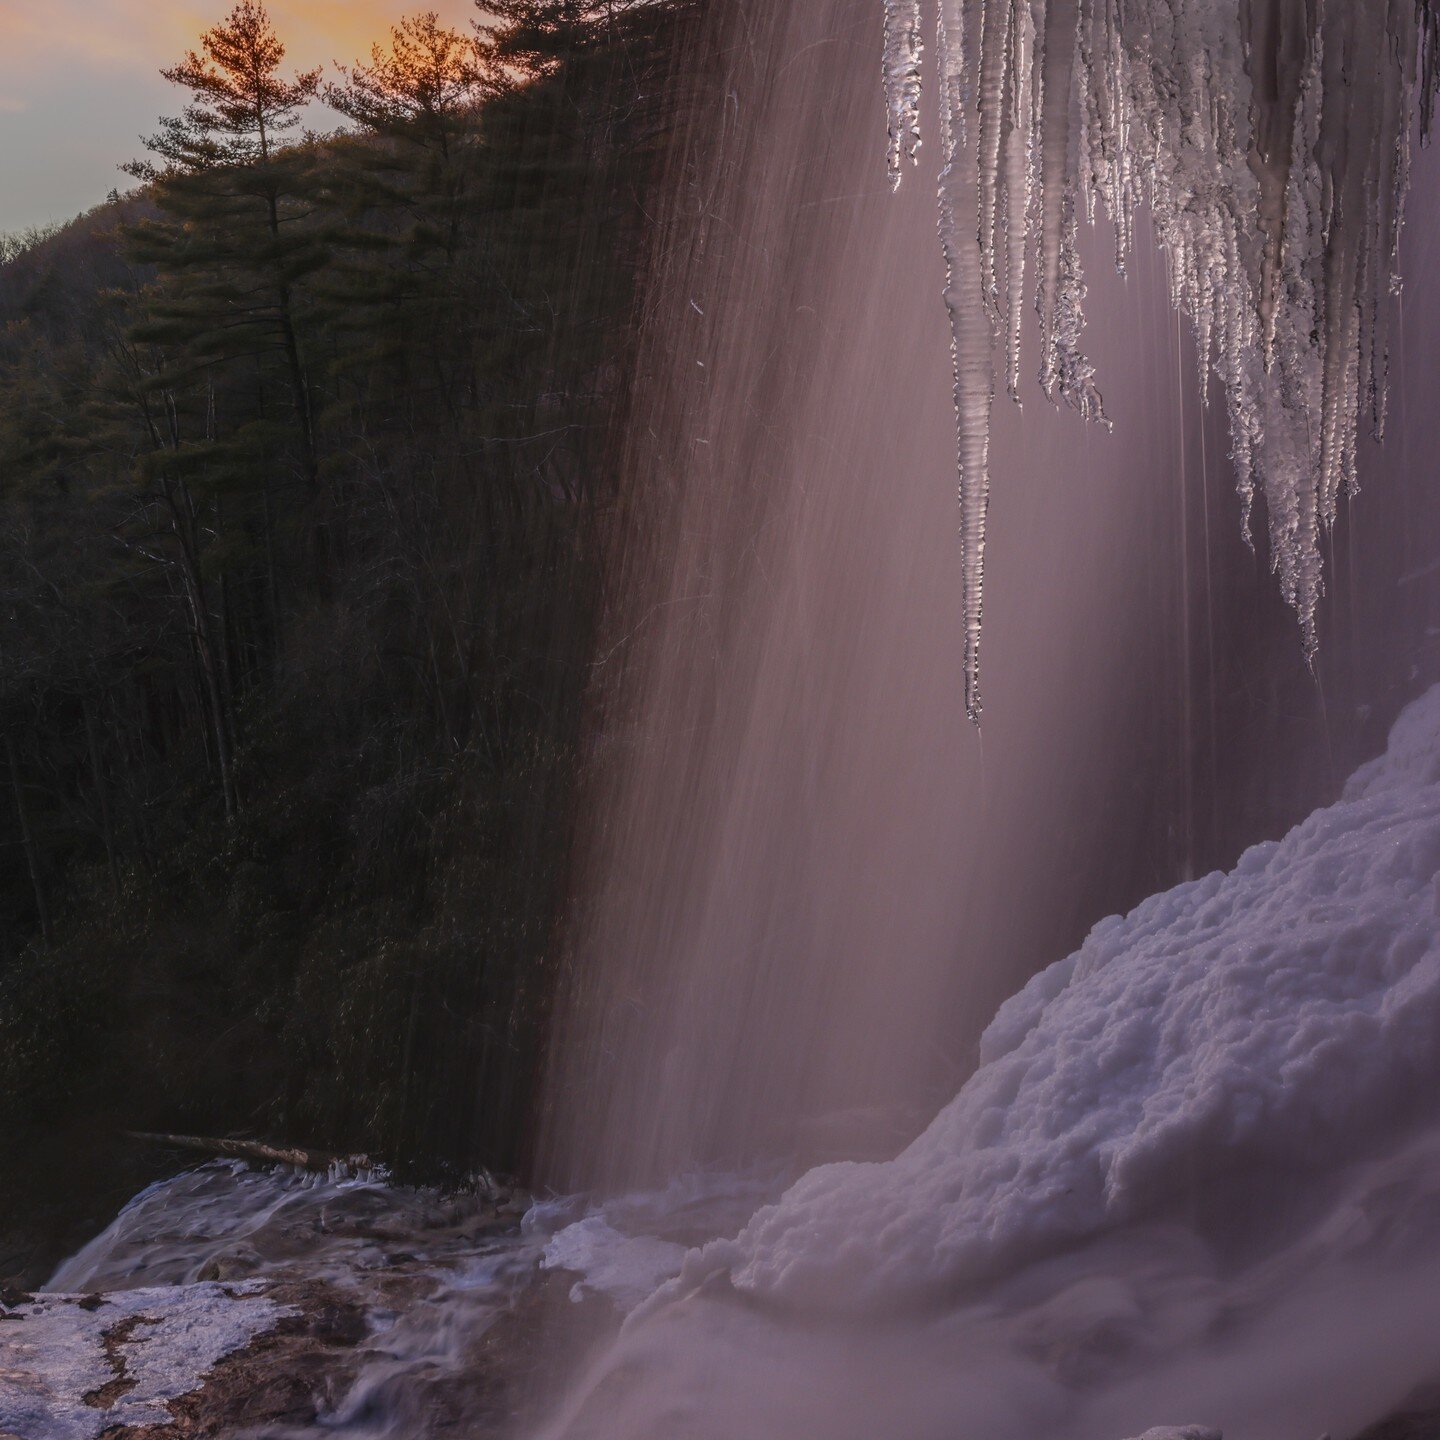 Never know what you'll get into with @wncphototours! Now I can say I experienced a sunset behind a frozen waterfall.

tell your story &lt;|&gt; see you soon

#ncwaterfall #adventure #frozen #ice #icicles #greatmemory #tightquarters #canon #sigmalens 